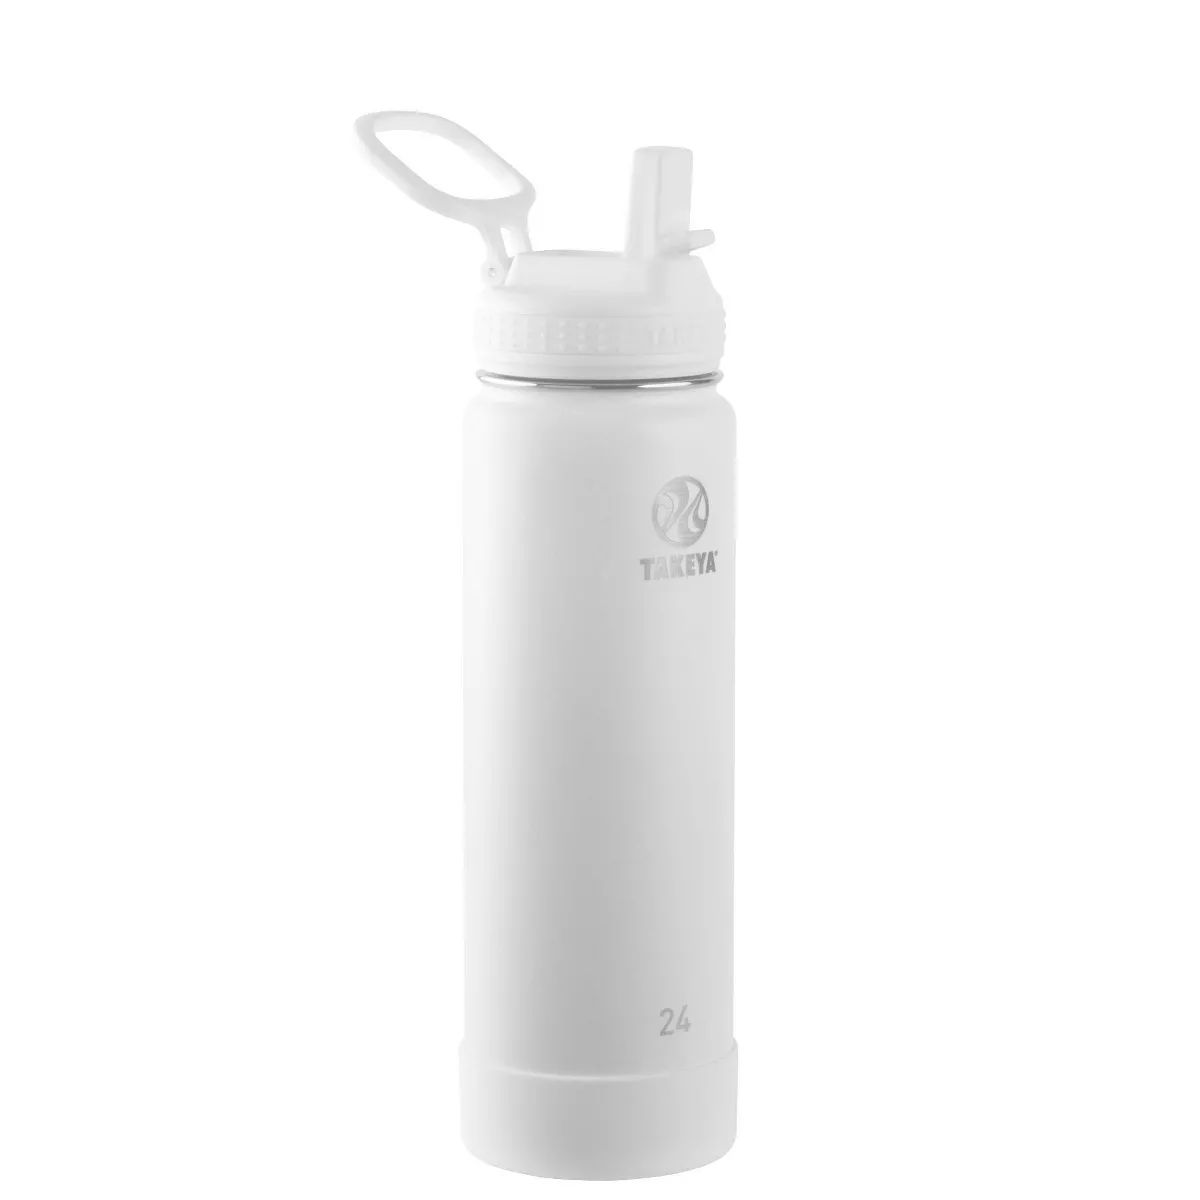 Takeya 24oz Actives Insulated Stainless Steel Water Bottle with Straw Lid | Target